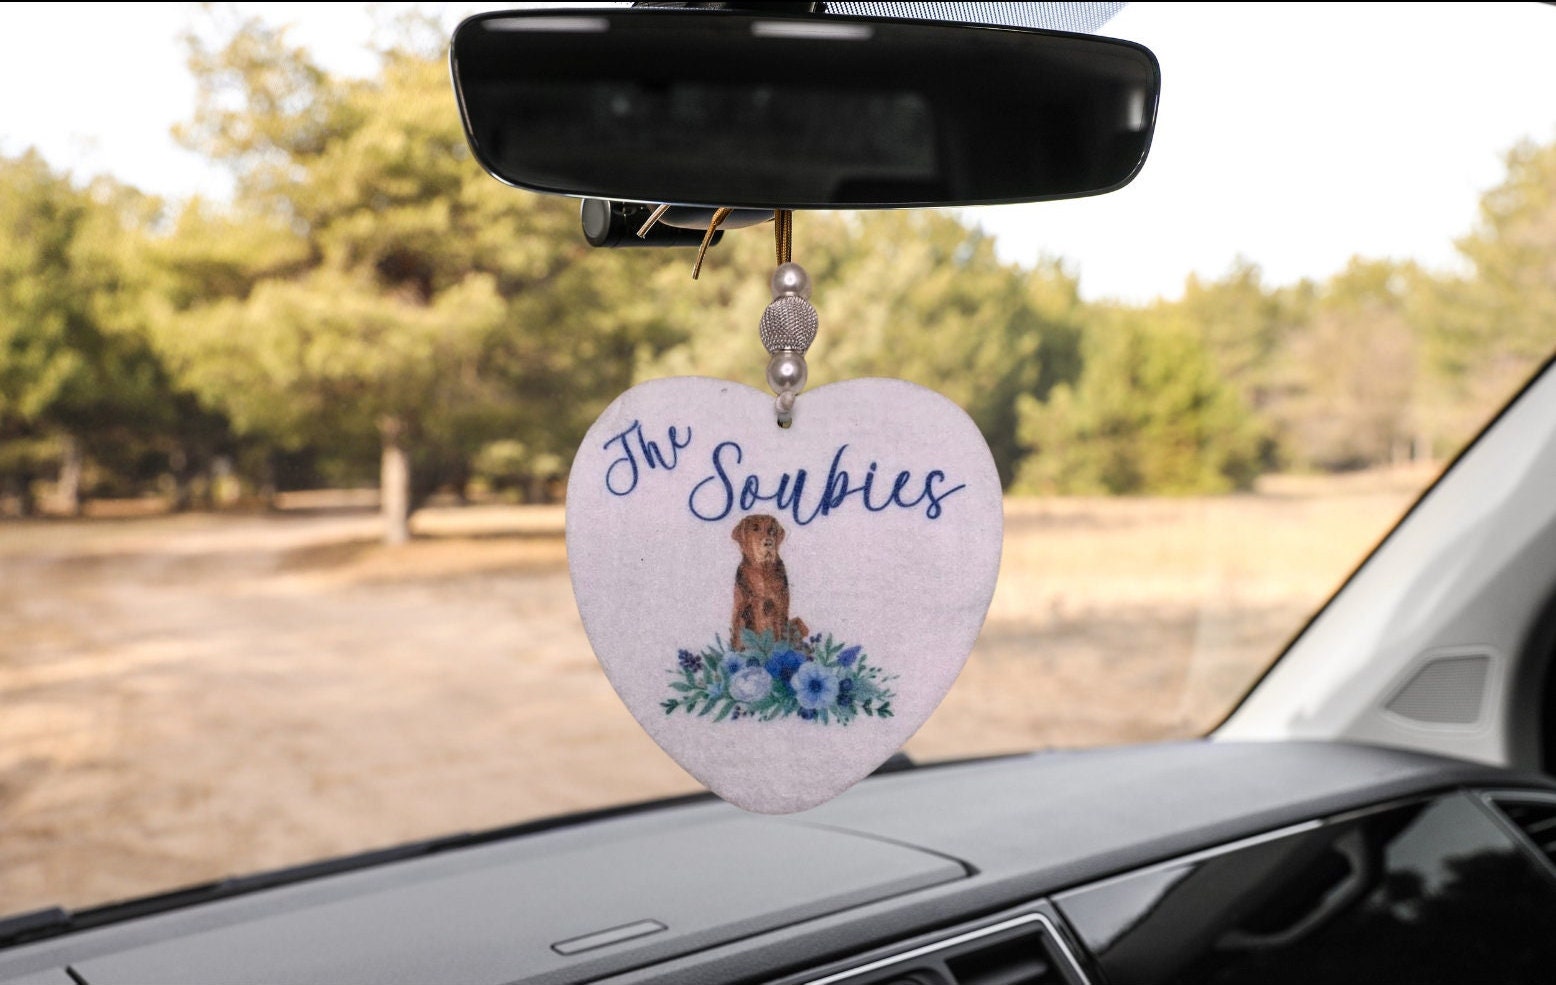 Car Fresheners and Re-scent Able Air Fresheners for Home, Gym